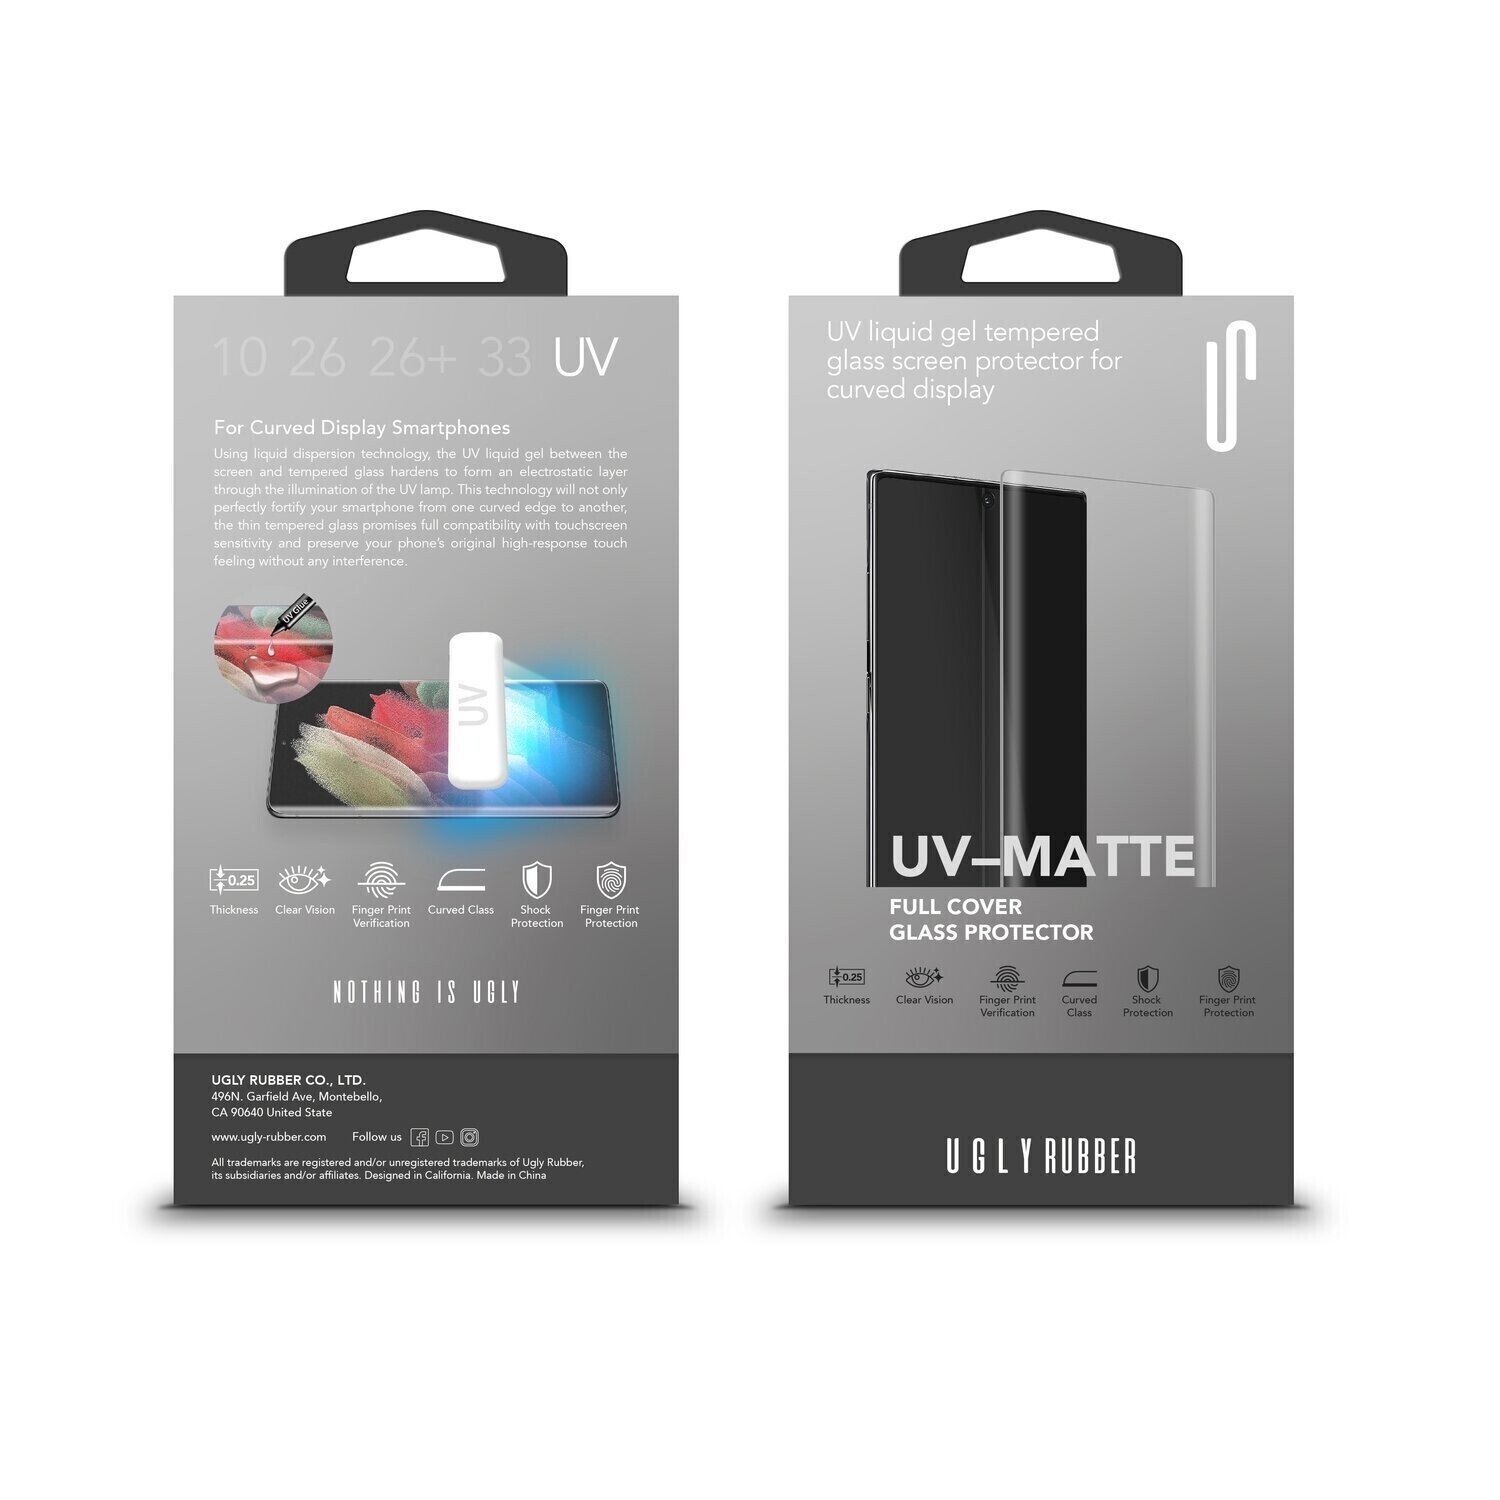 Ugly Rubber Huawei P30 Pro UV Liquid Gel Tempered Glass, Matte